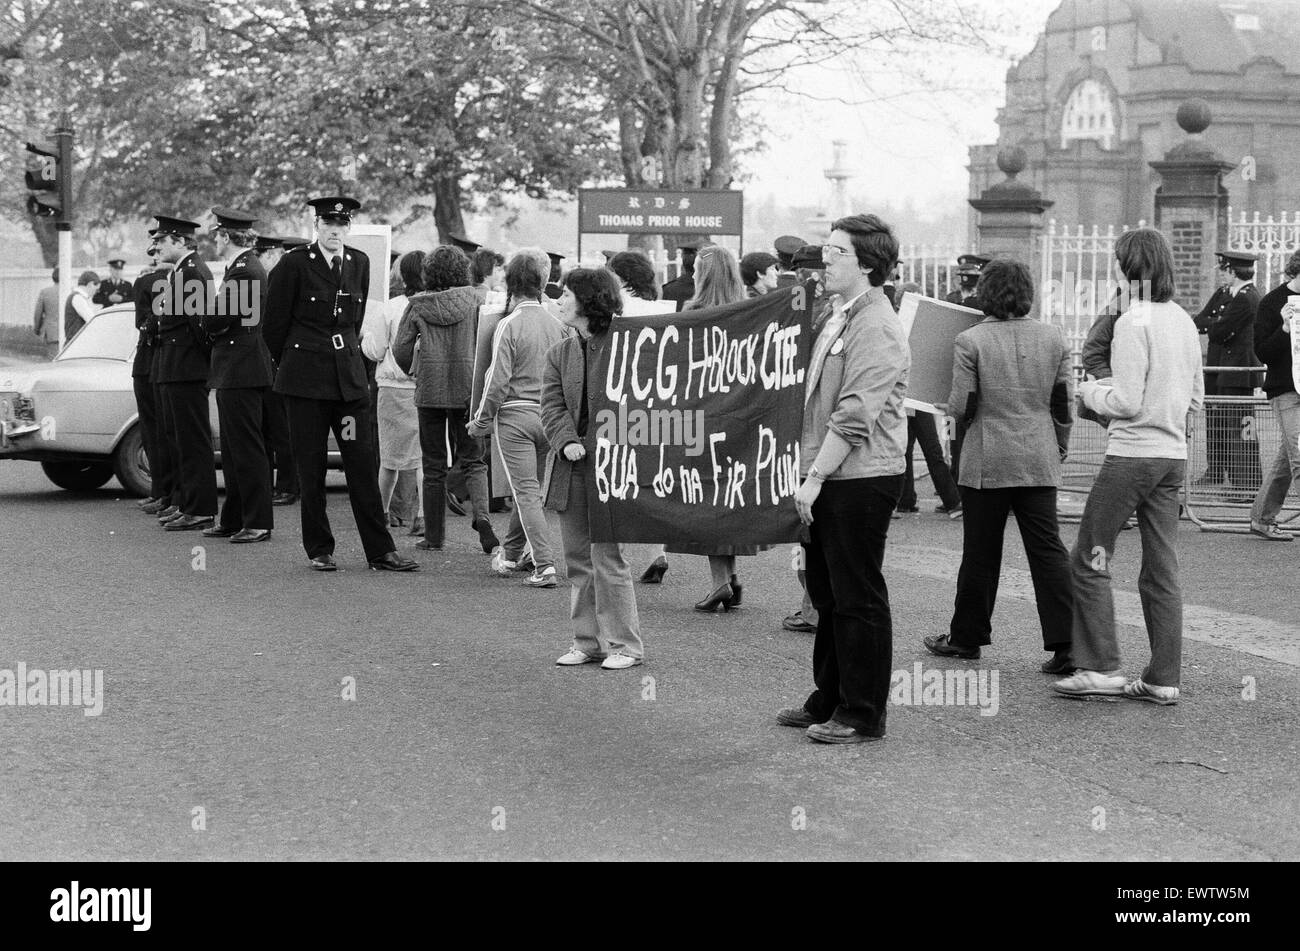 Protest during the Eurovision Song Contest in Dublin. The demonstration is in support of H block prisoners at Ulster's Maze jail. 4th April 1981. Stock Photo